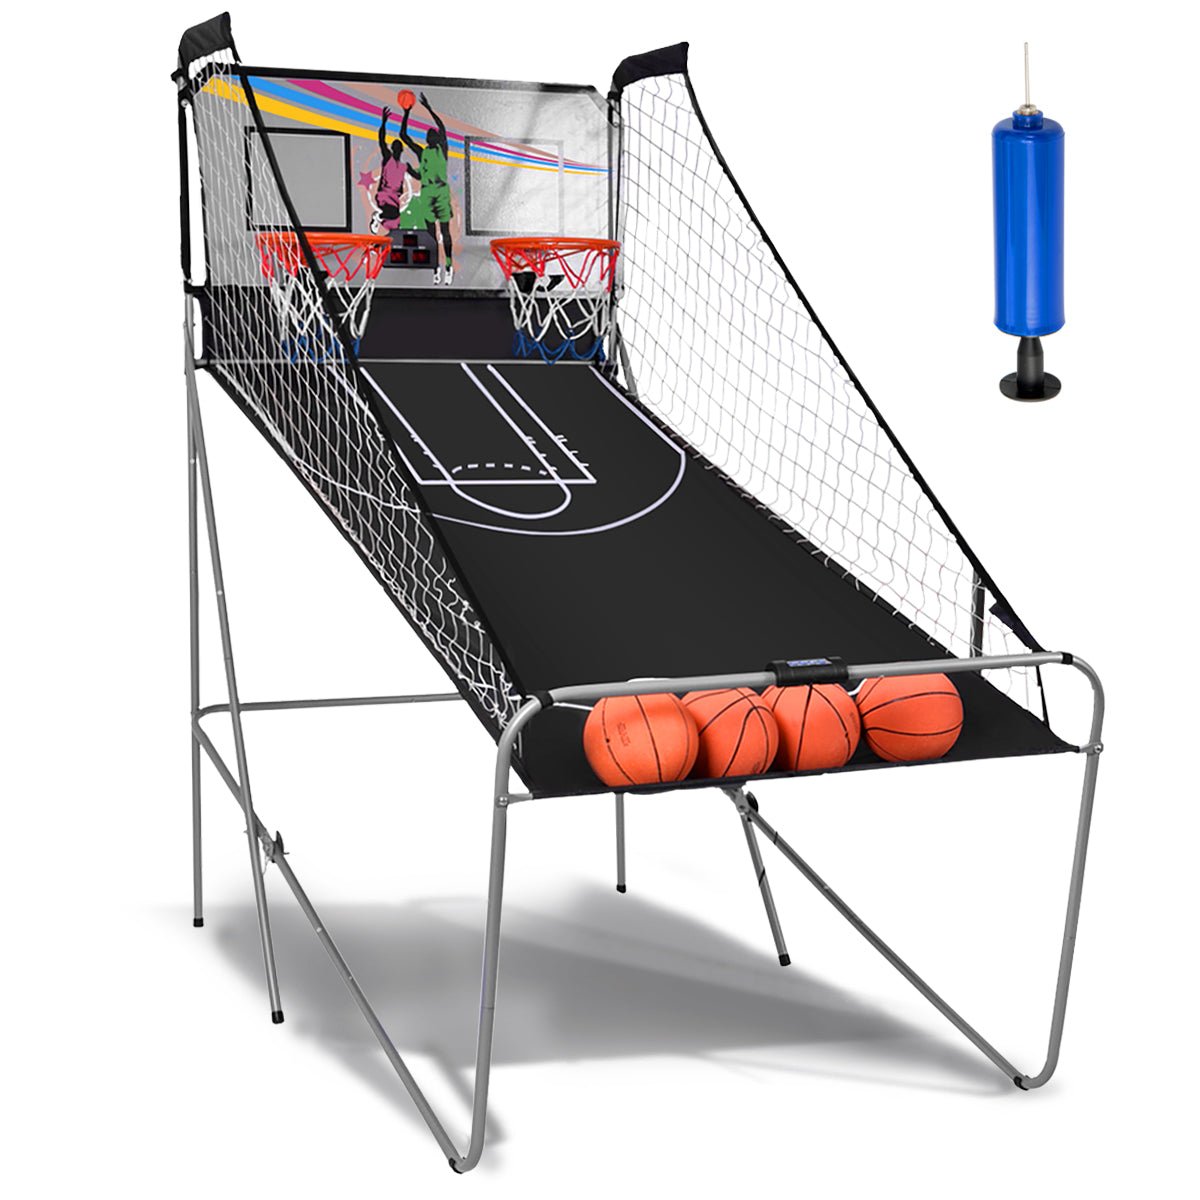 Bring Excitement Home with the 8-in-1 Electronic Hoop Game